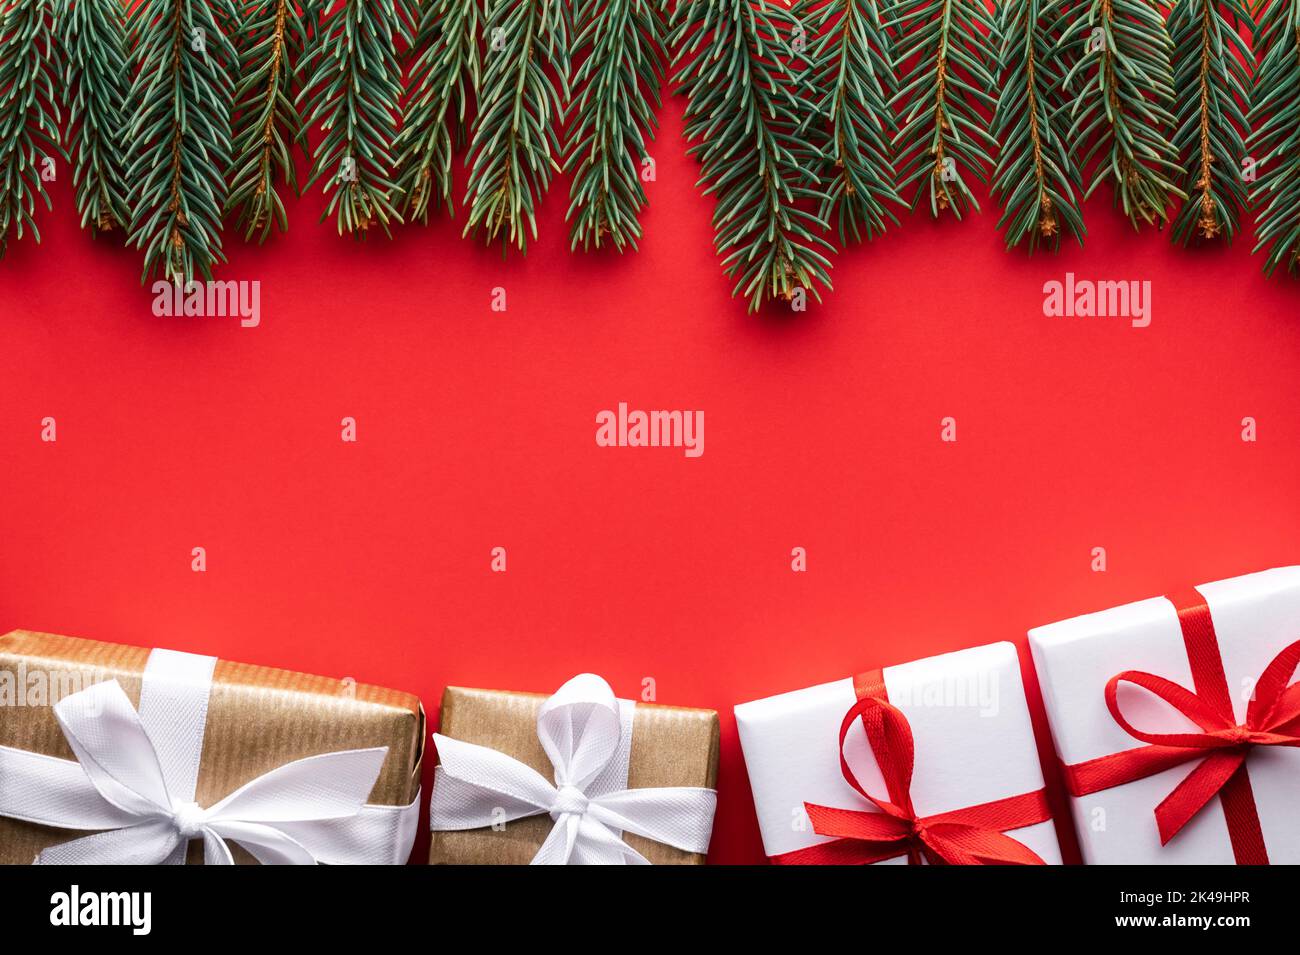 Creative Christmas background with Christmas gift boxes and pine twigs on red background. Flat lay, top view, copy space Stock Photo